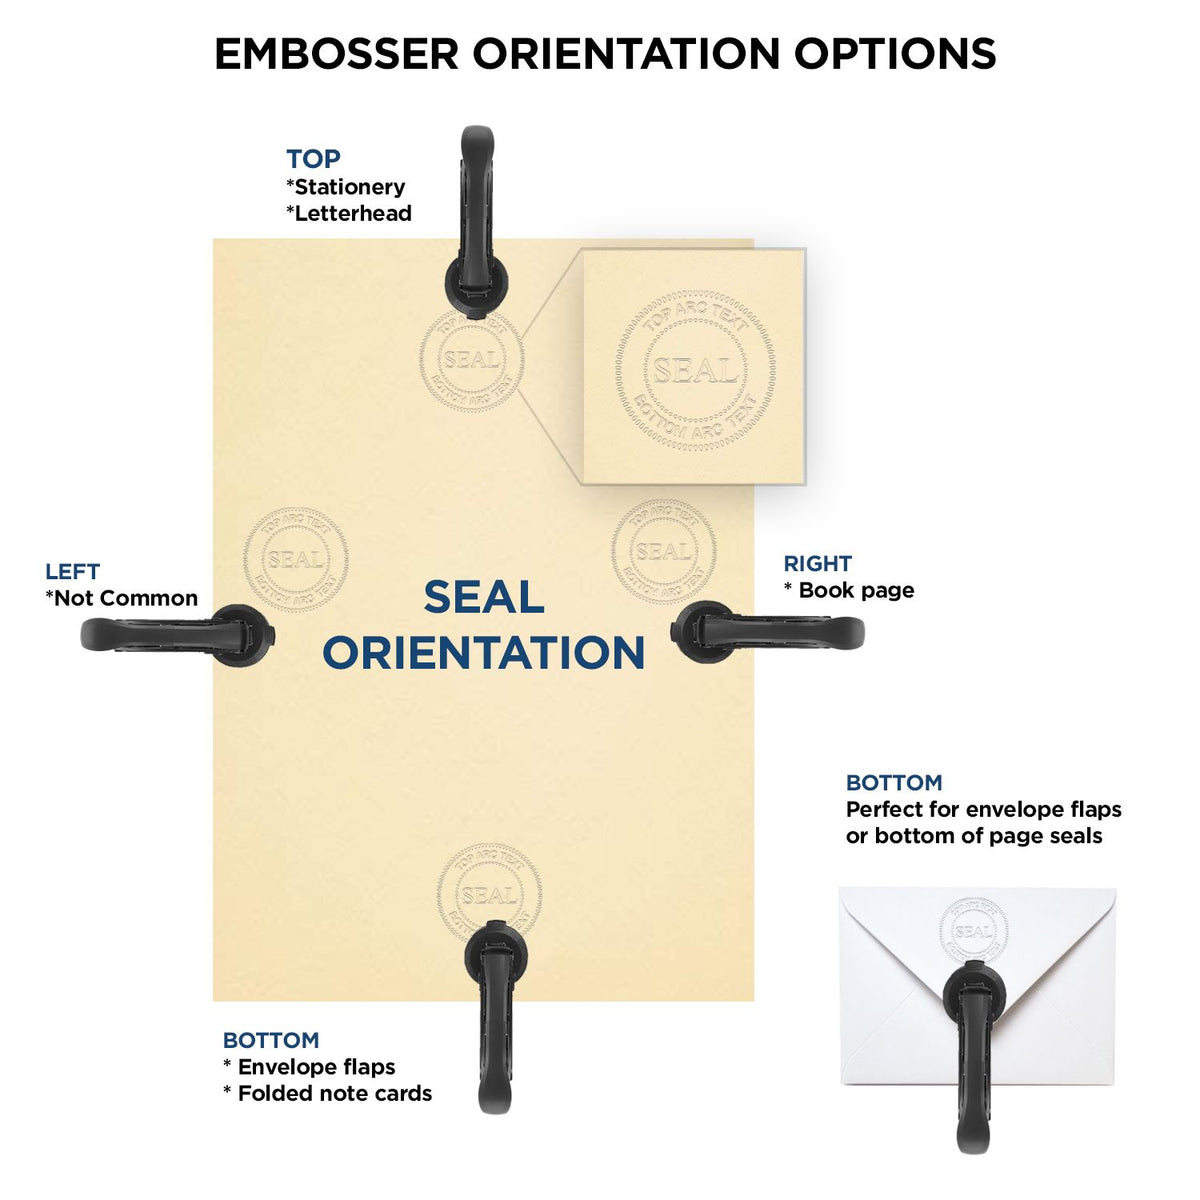 An infographic for the Gift South Carolina Land Surveyor Seal showing embosser orientation, this is showing examples of a top, bottom, right and left insert.